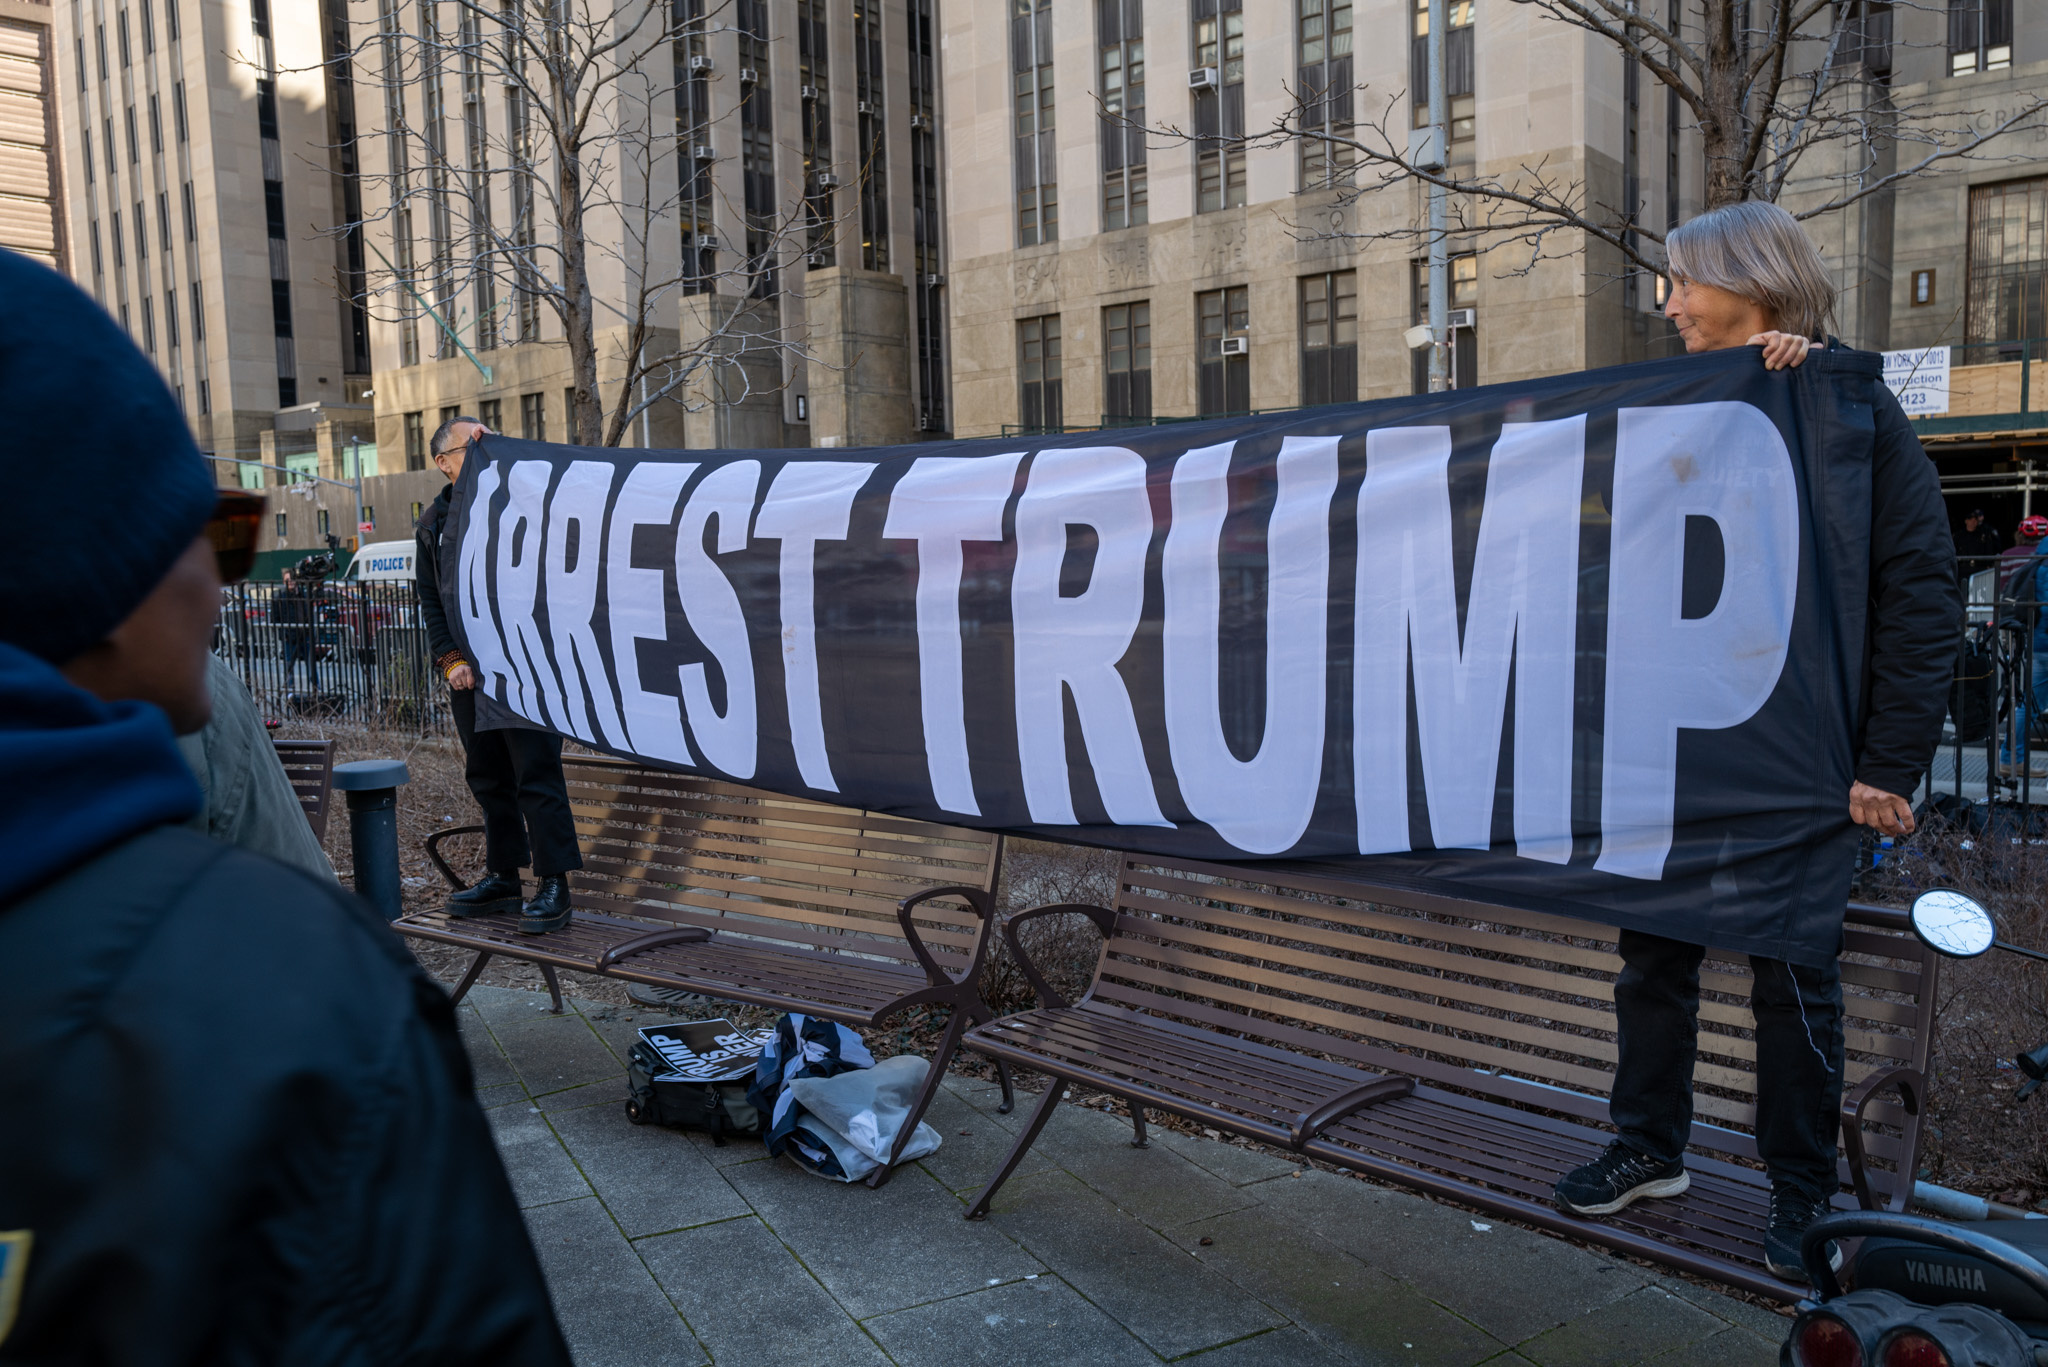 People gather outside of a Manhattan courthouse as the nation waits for the possibility of an indictment against former president Donald Trump by the Manhattan District Attorney Alvin Bragg’s office on March 21, 2023 in New York City.